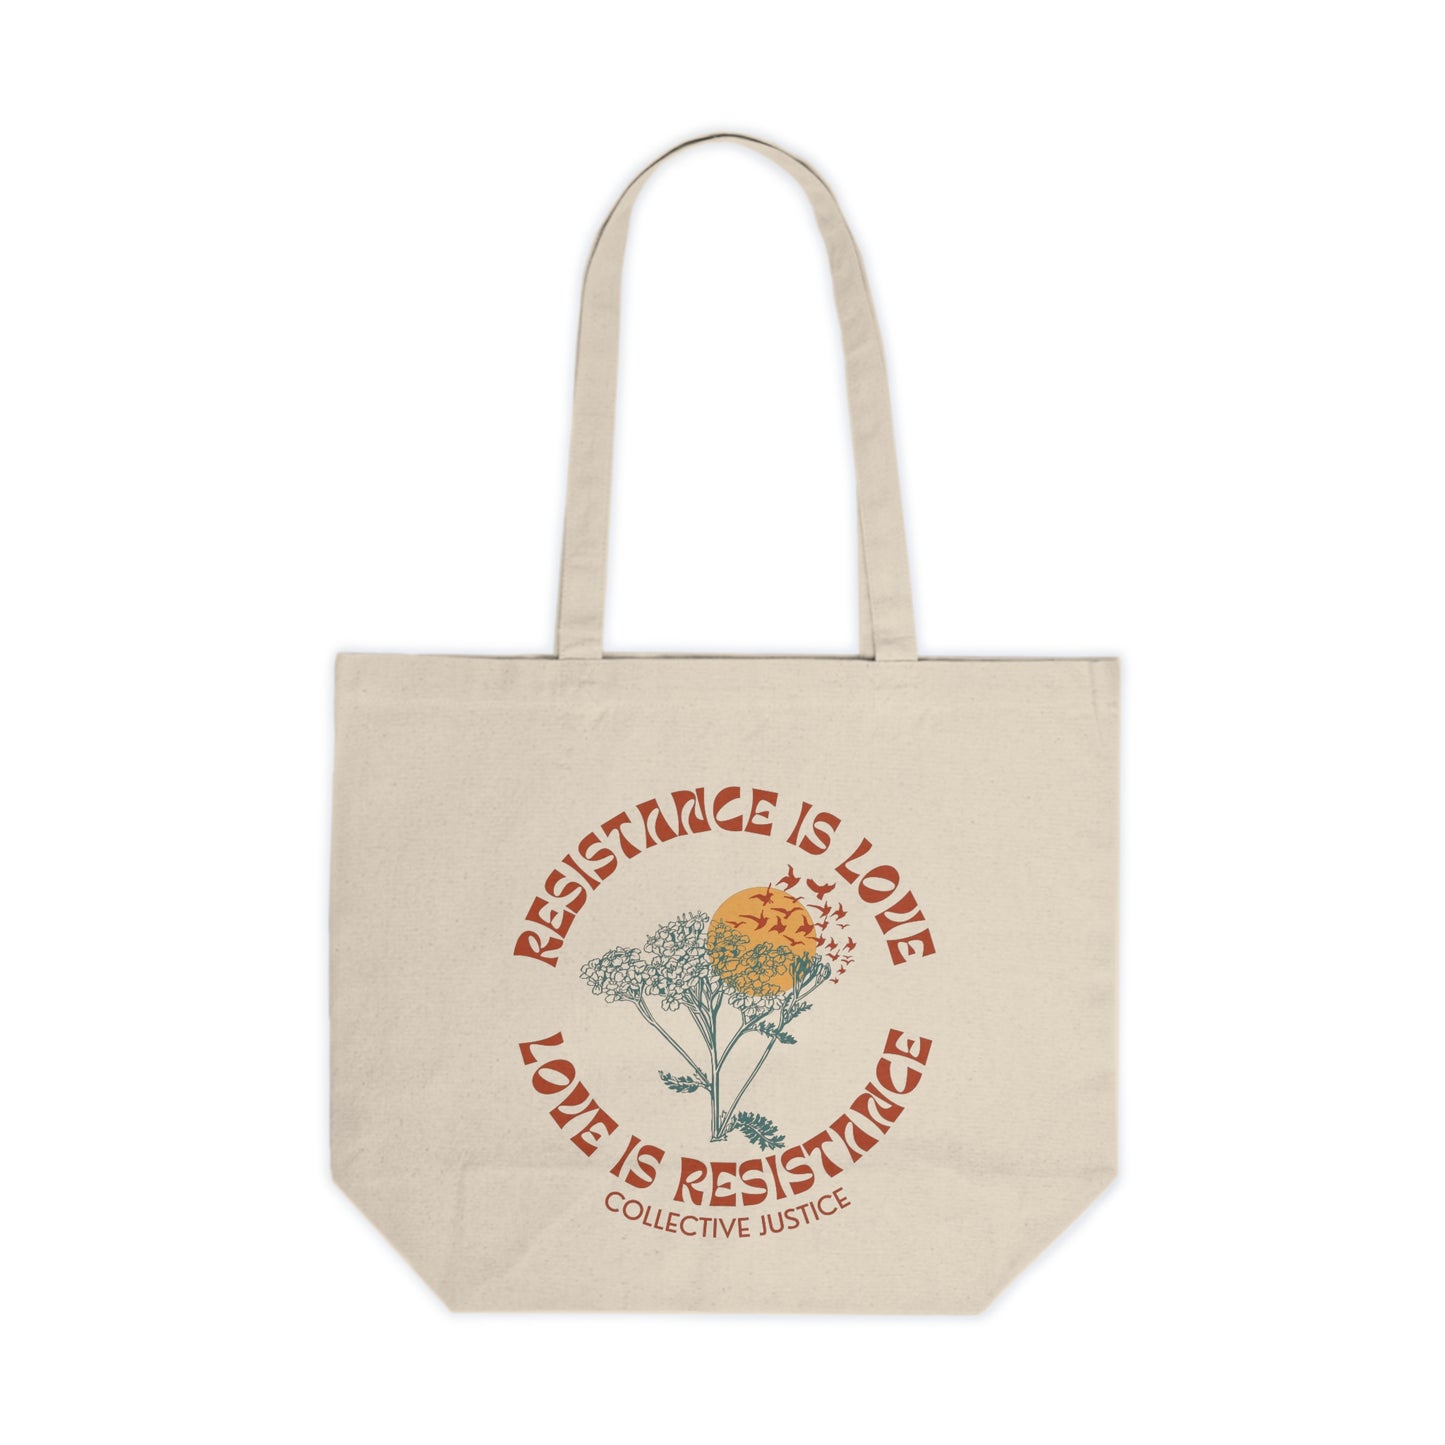 Handle With Care Tote